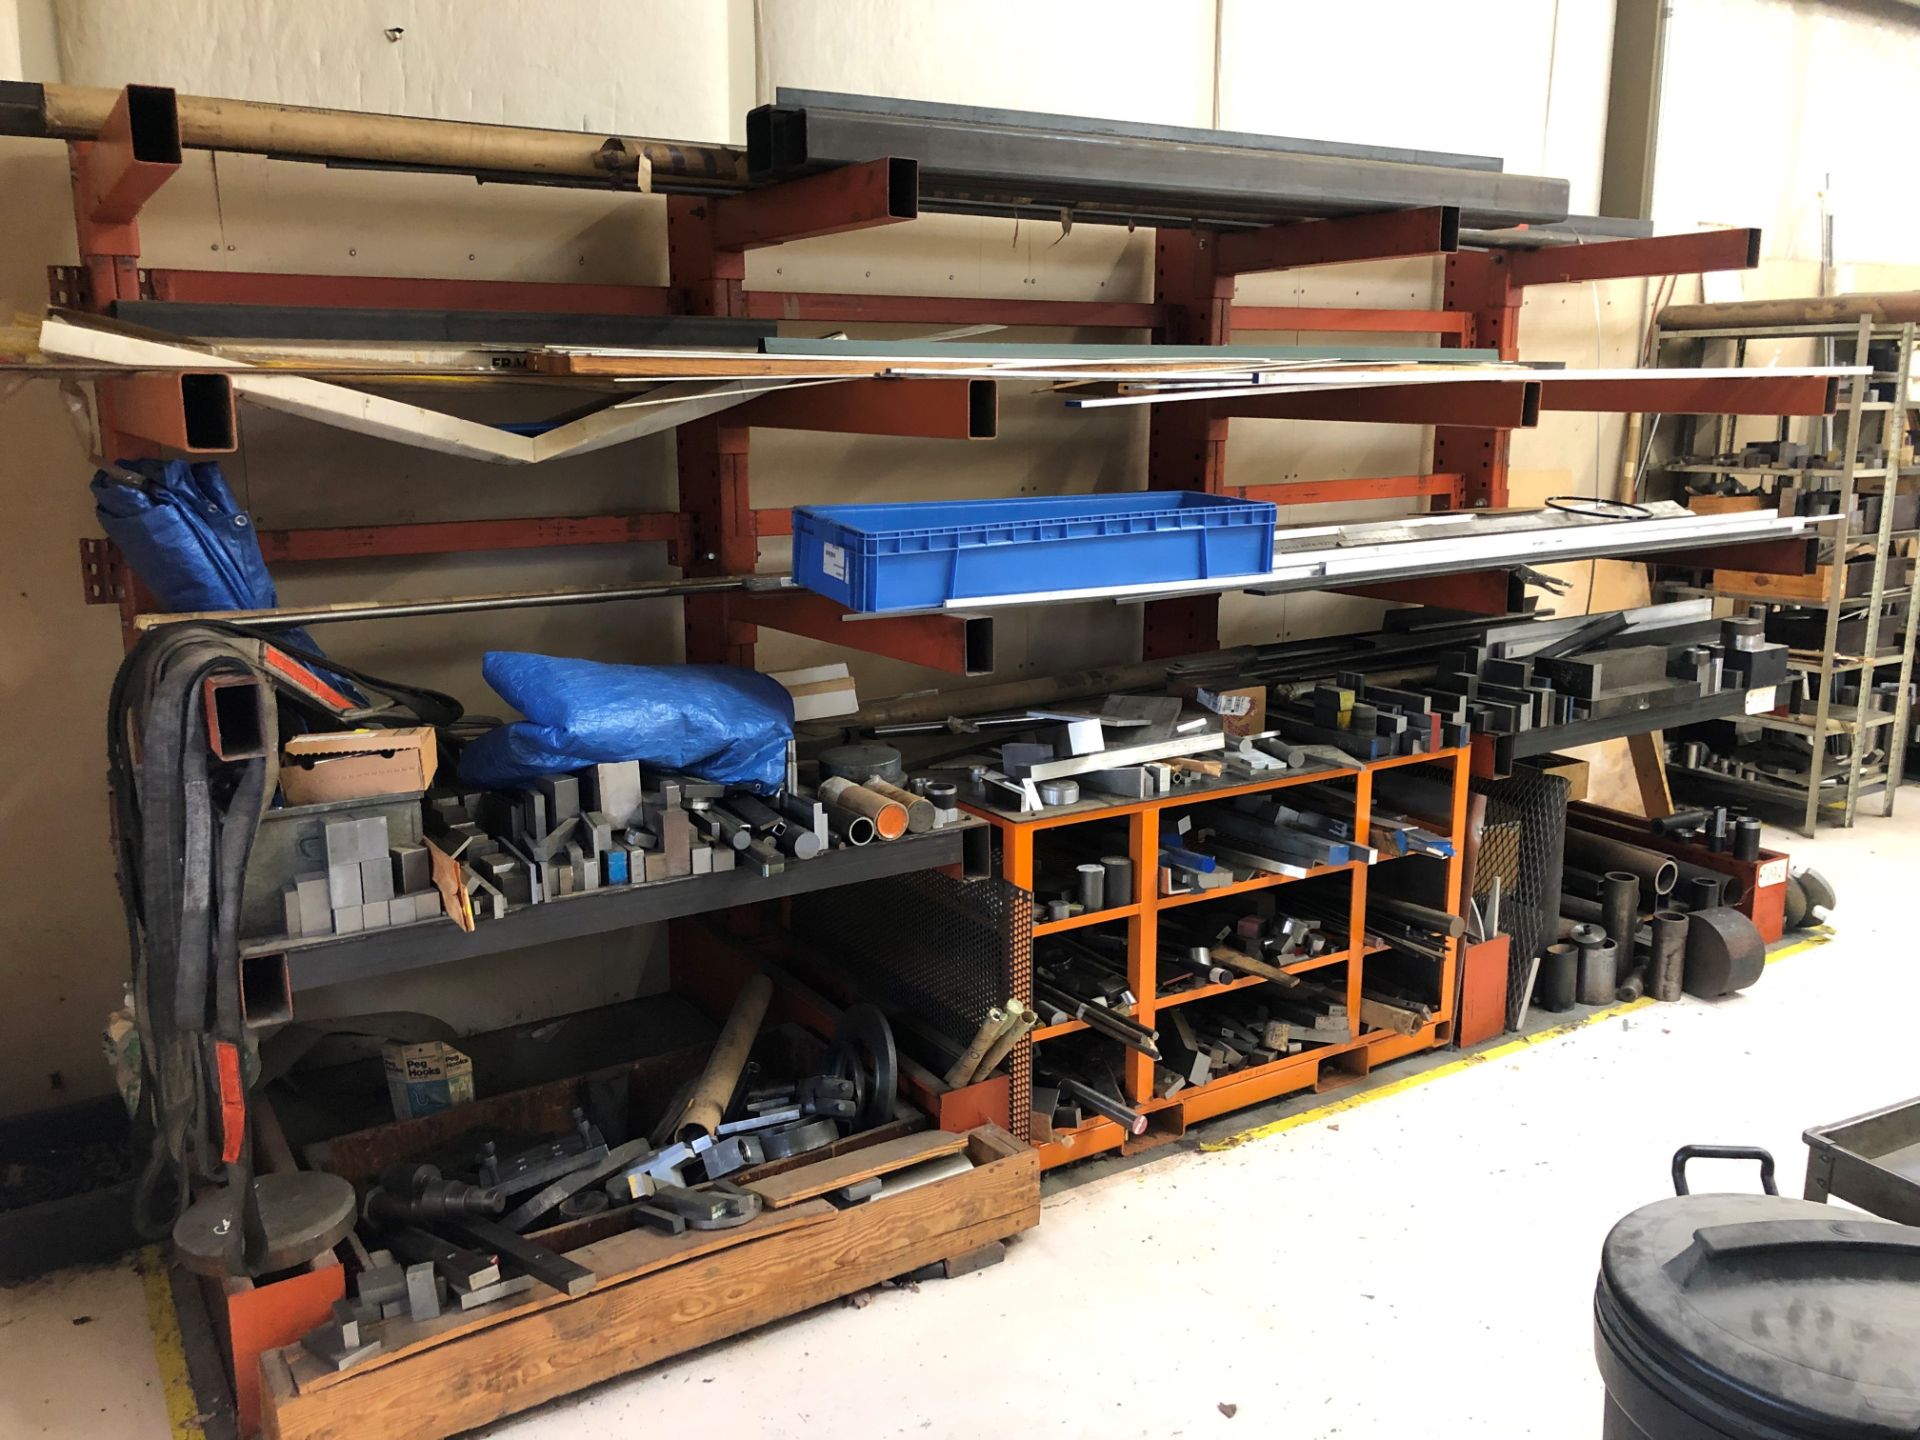 Contents of Cantilever Rack